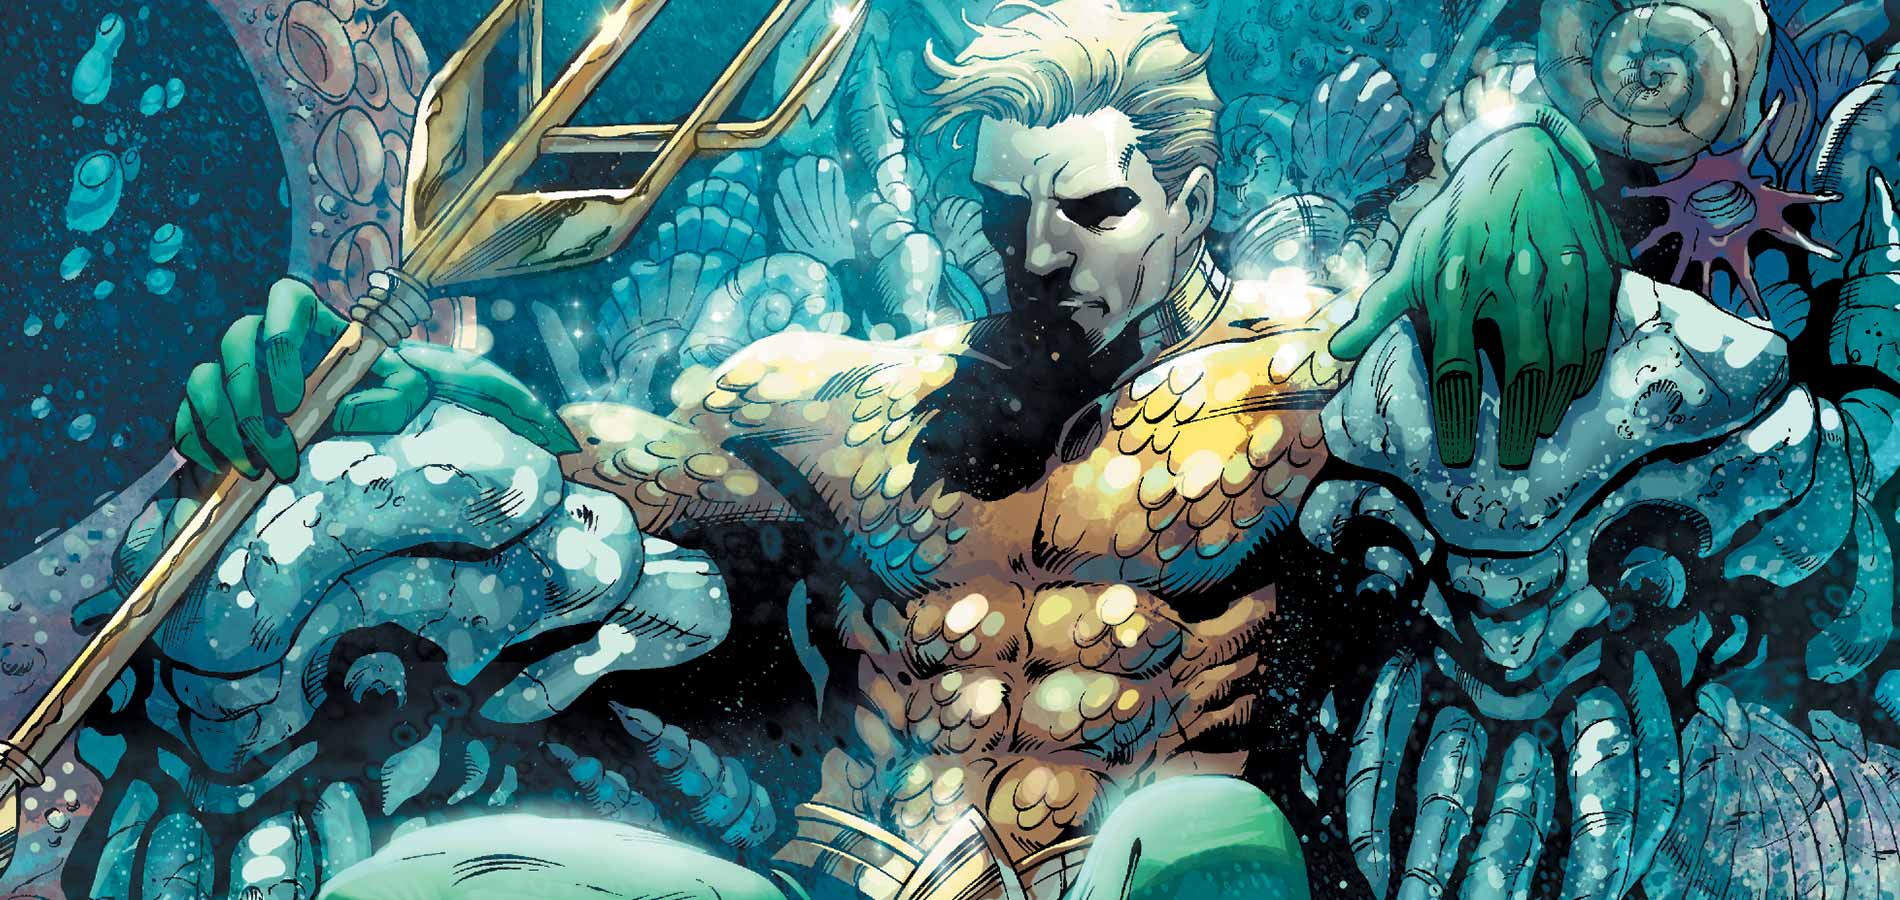 Take a Look at Aquaman in Costume for Batman V. Superman